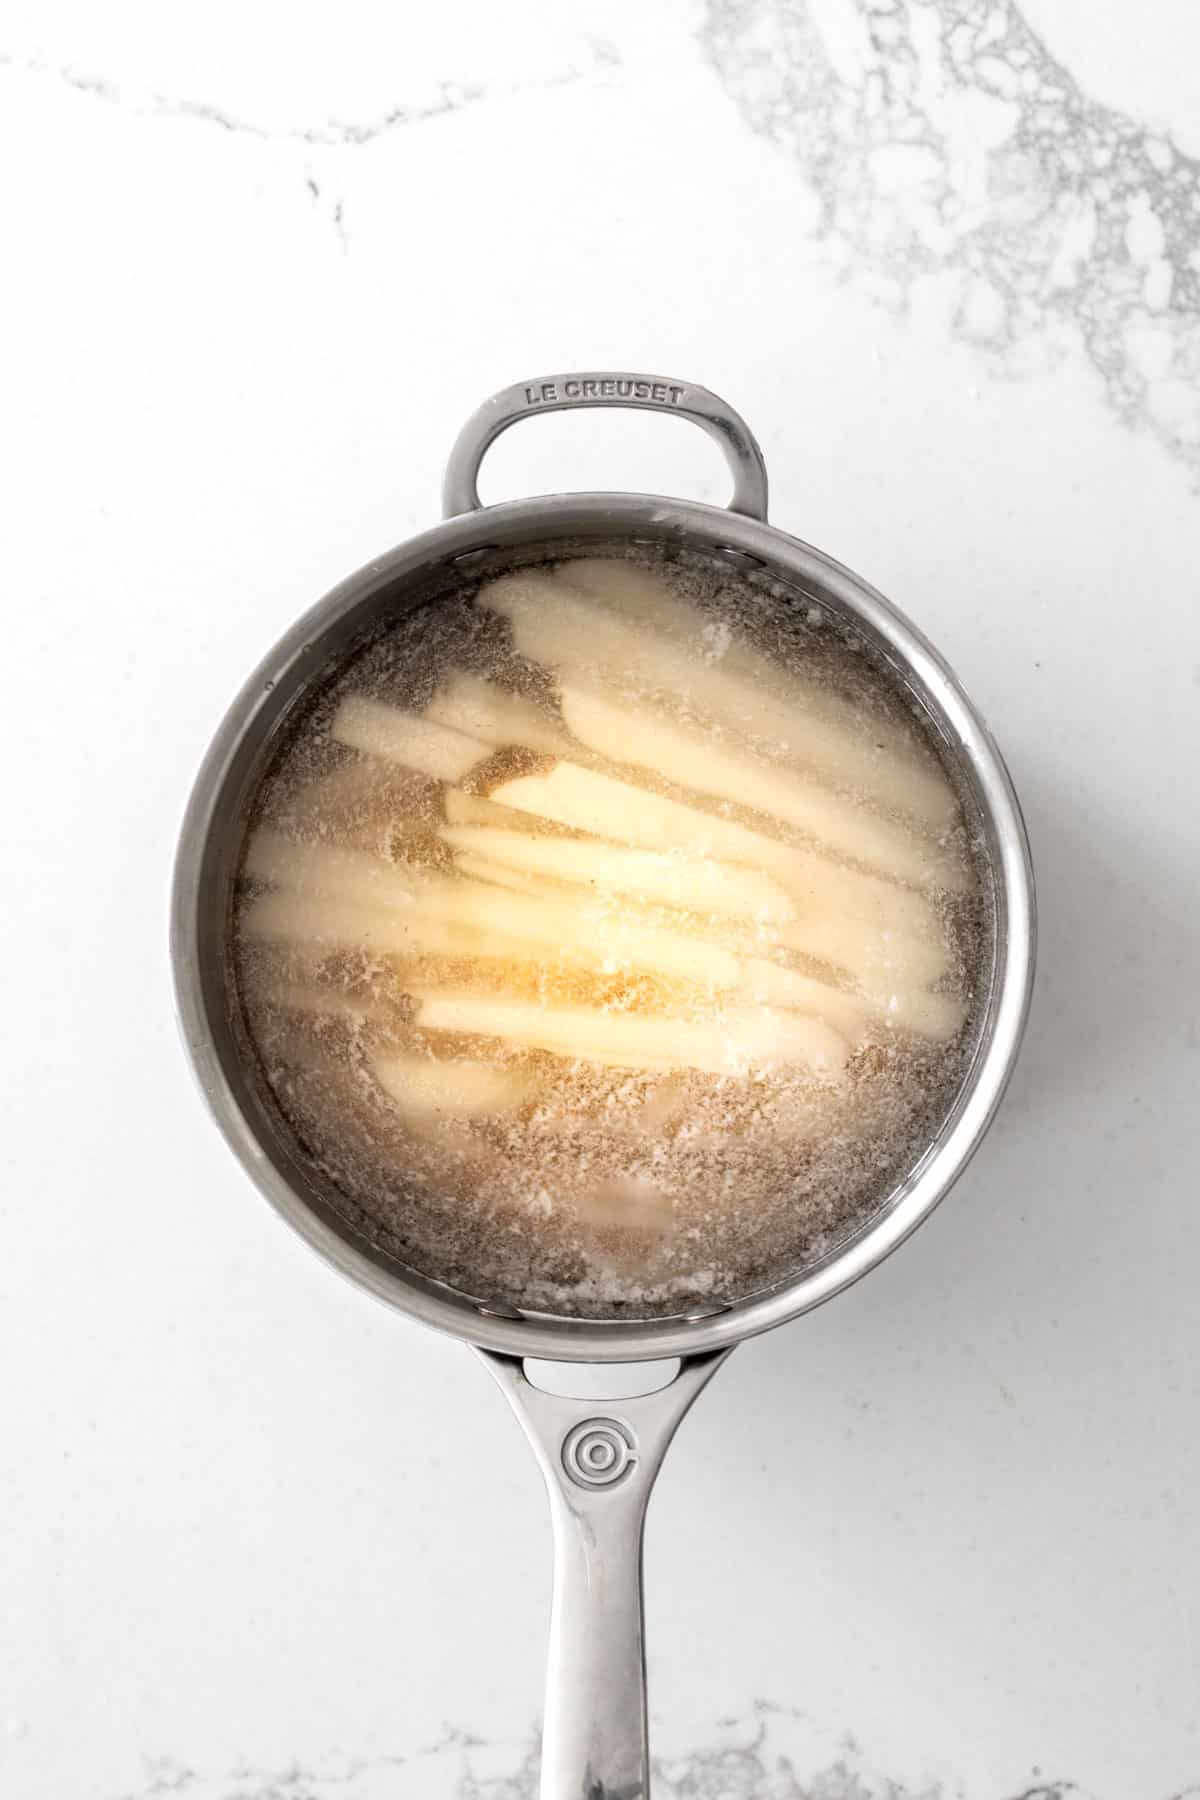 Potato fries in a pot of water